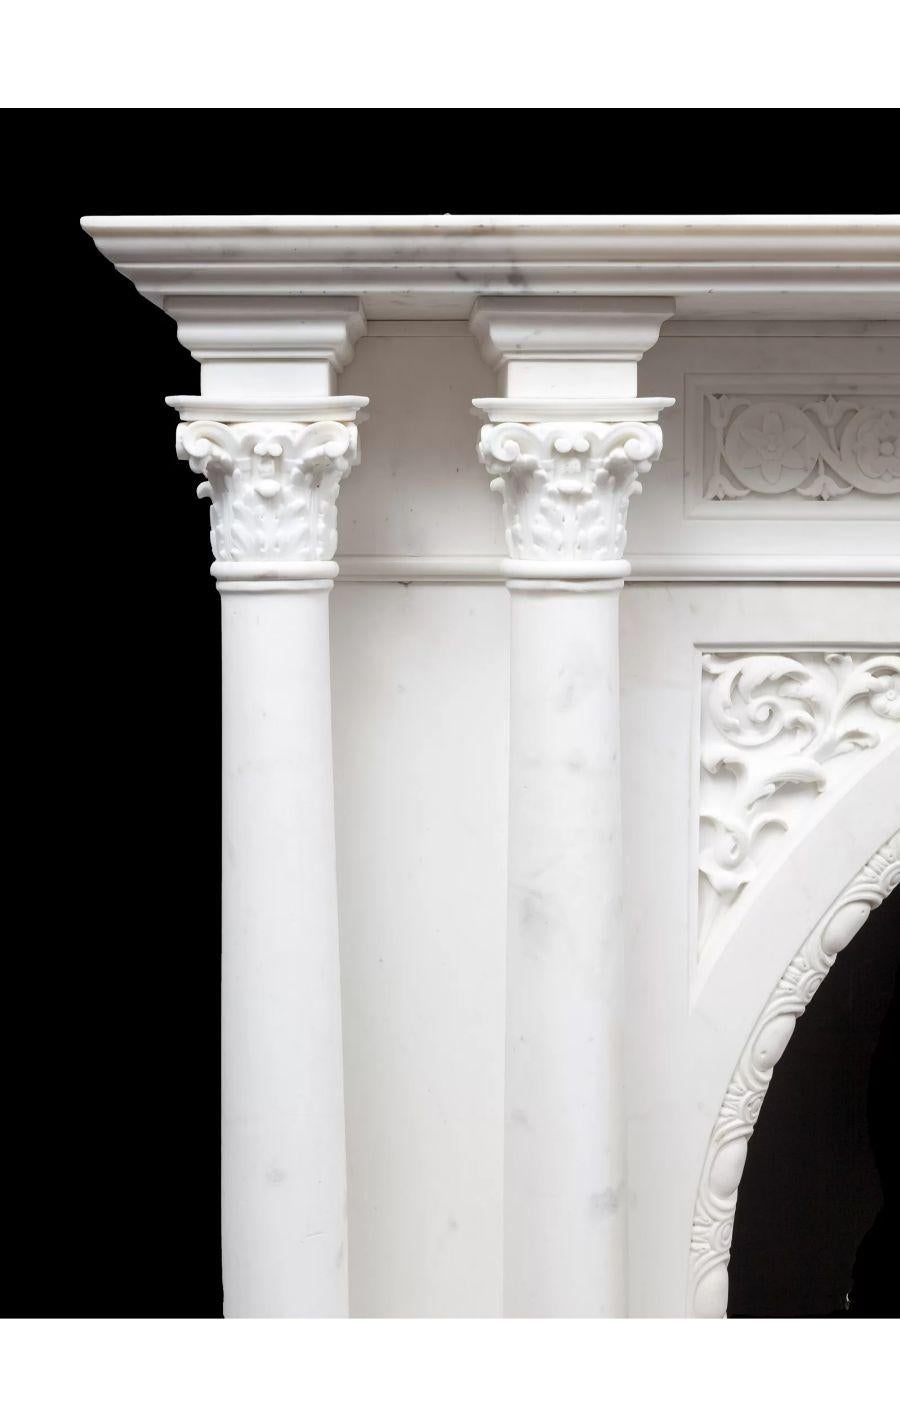 A large and grand antique Statuary marble fireplace dating to the 1850’s.

Each pilaster with two full rounded and free standing Corinthian columns that support a substantial mantel shelf. The arched opening carved with egg and dart moulding, this